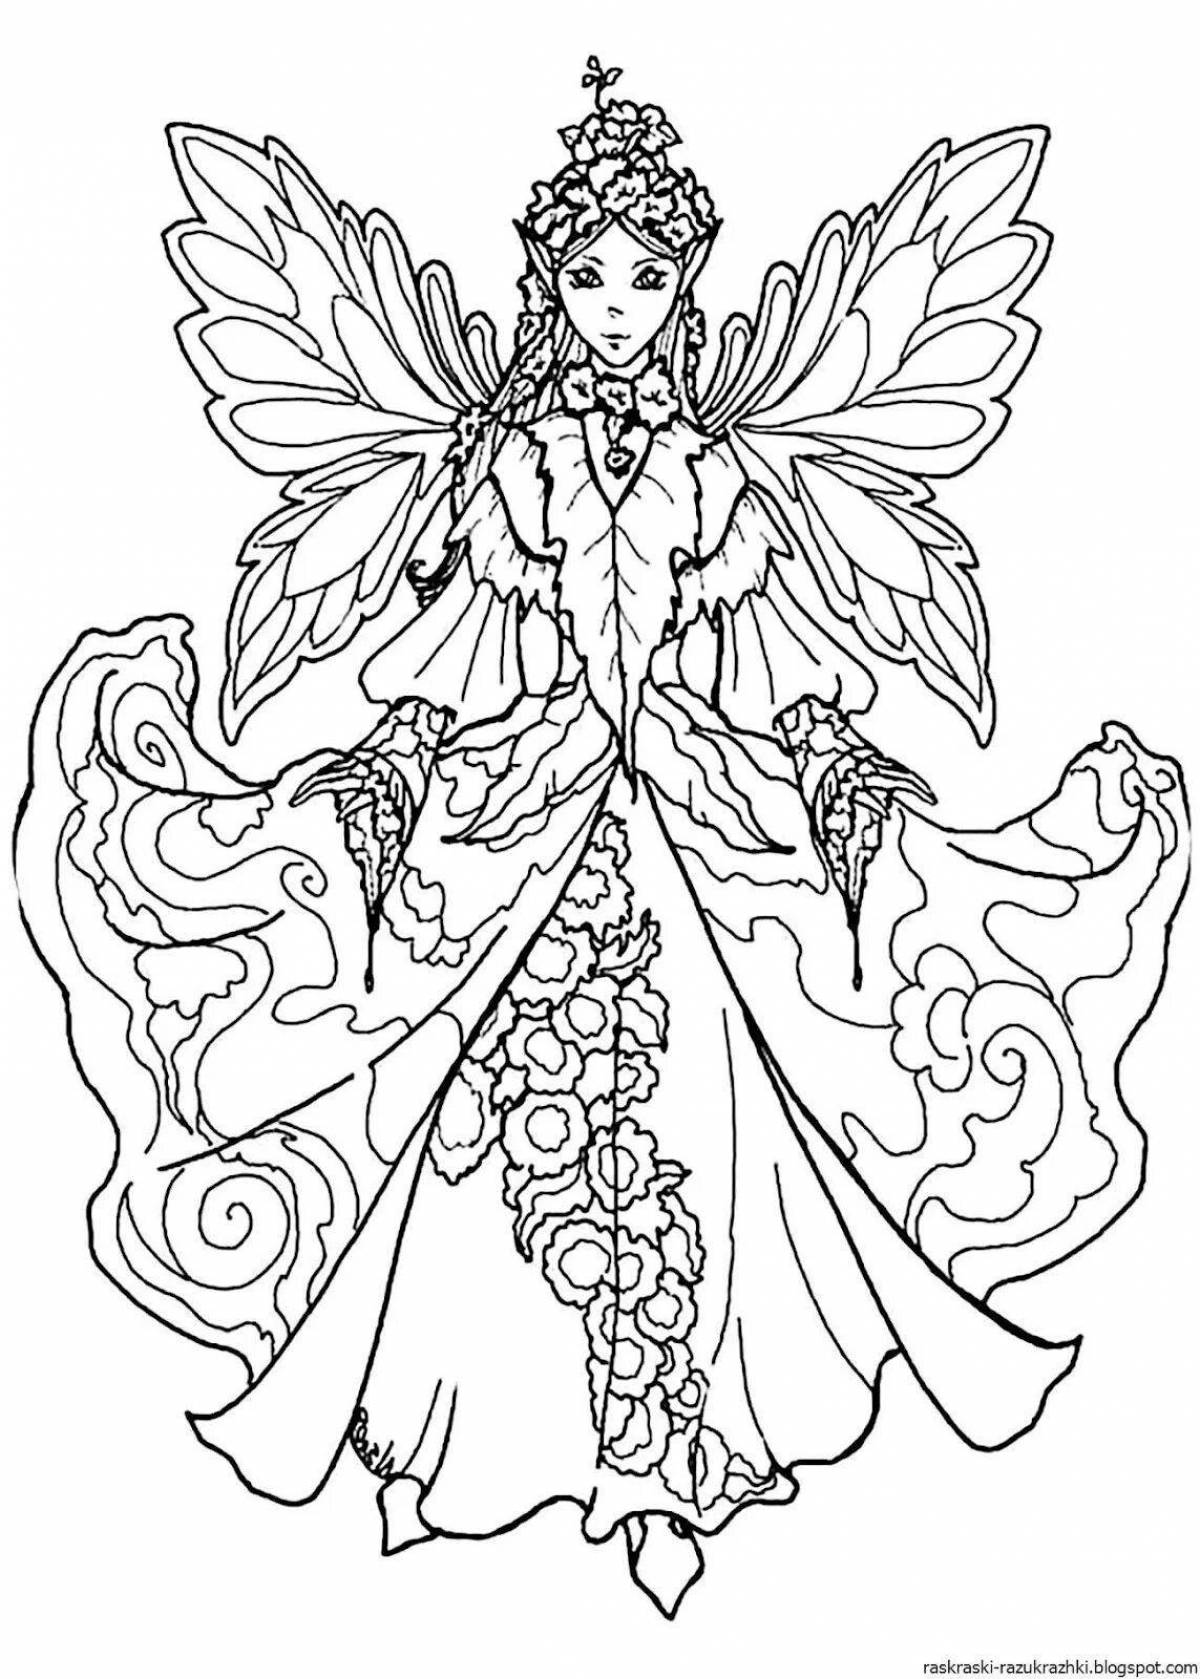 Coloring book shining forest fairy